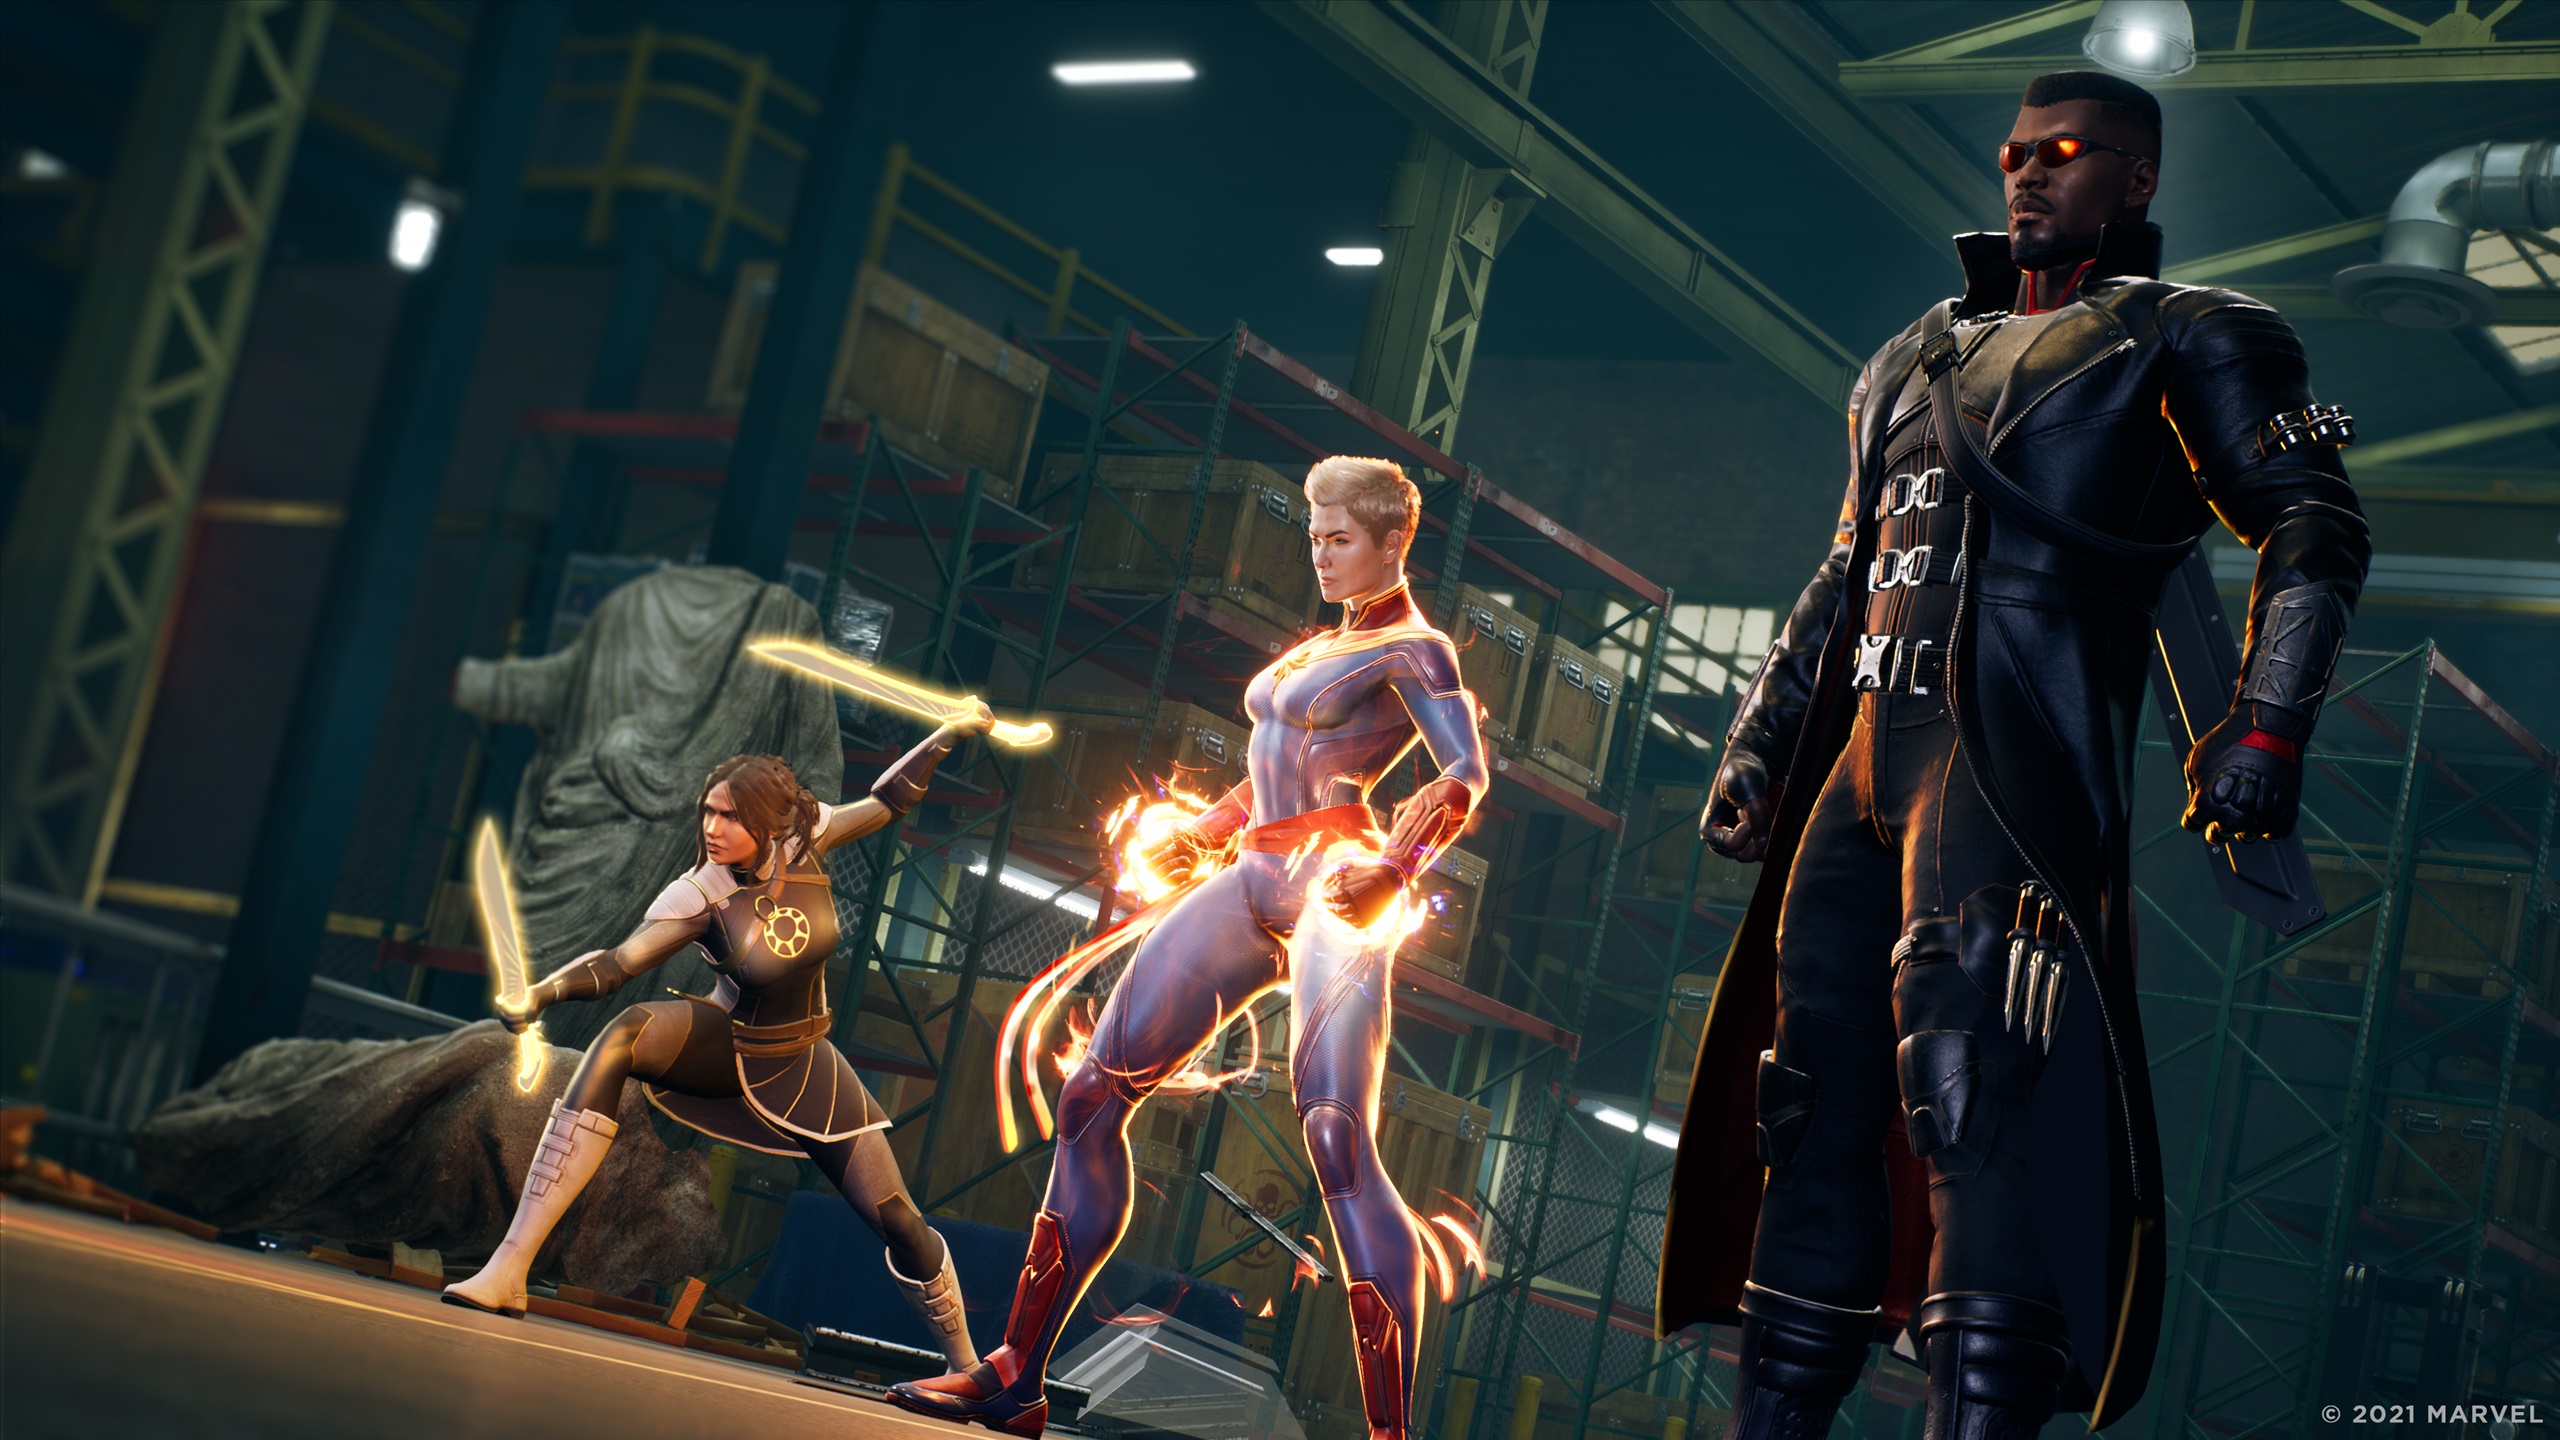 An XCOM Style Game In The Marvel Universe? Oh Please, Sign Me Up!